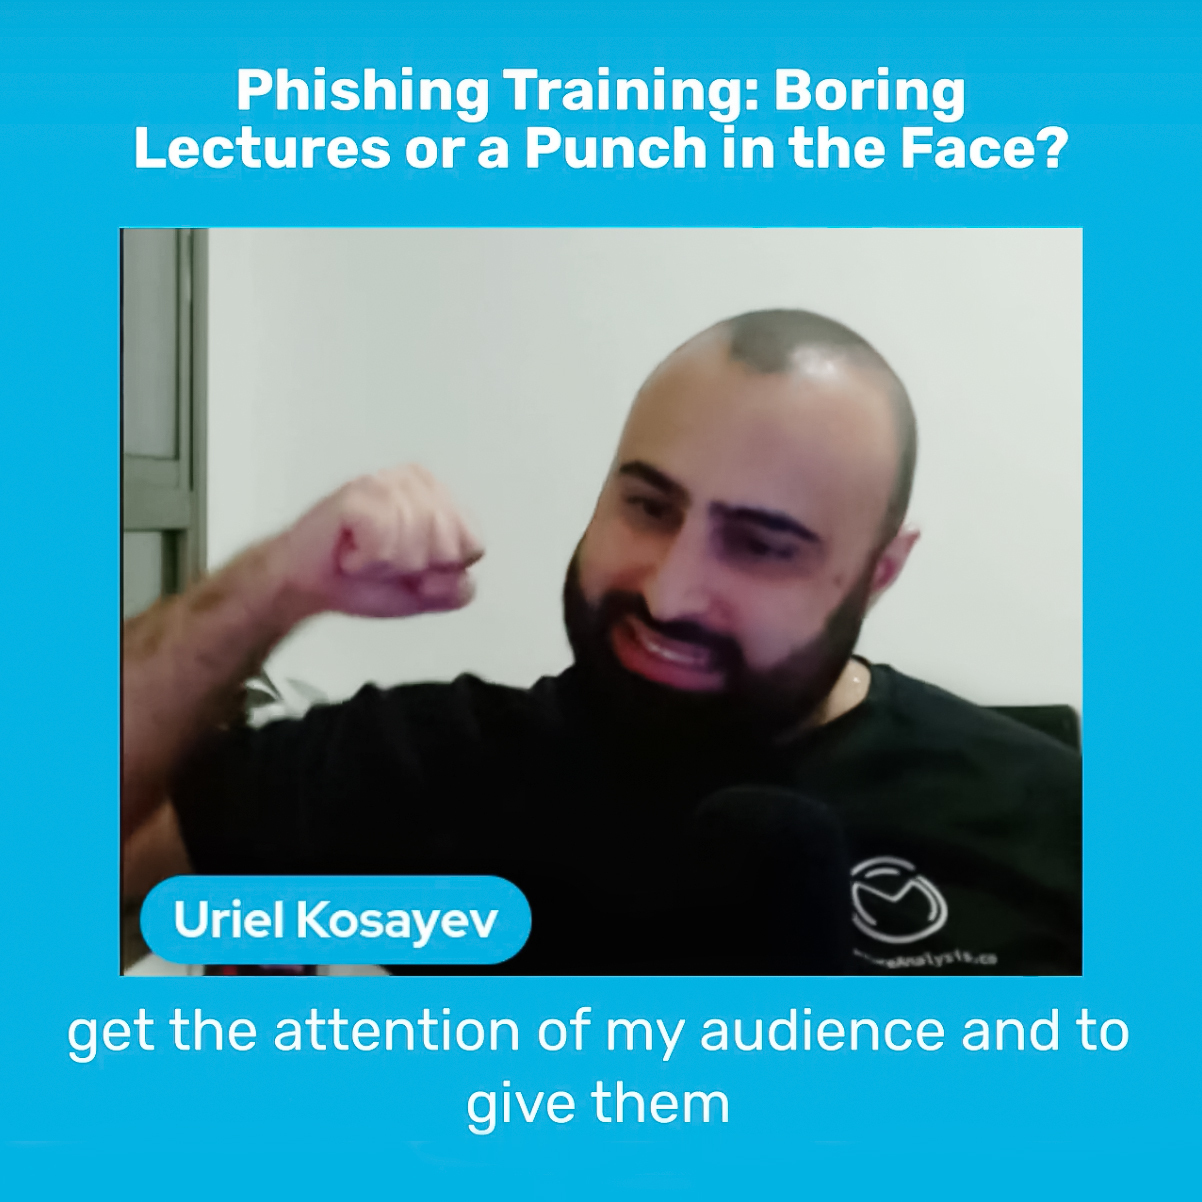 phishing-training-boring-lectures-or-a-punch-in-the-face